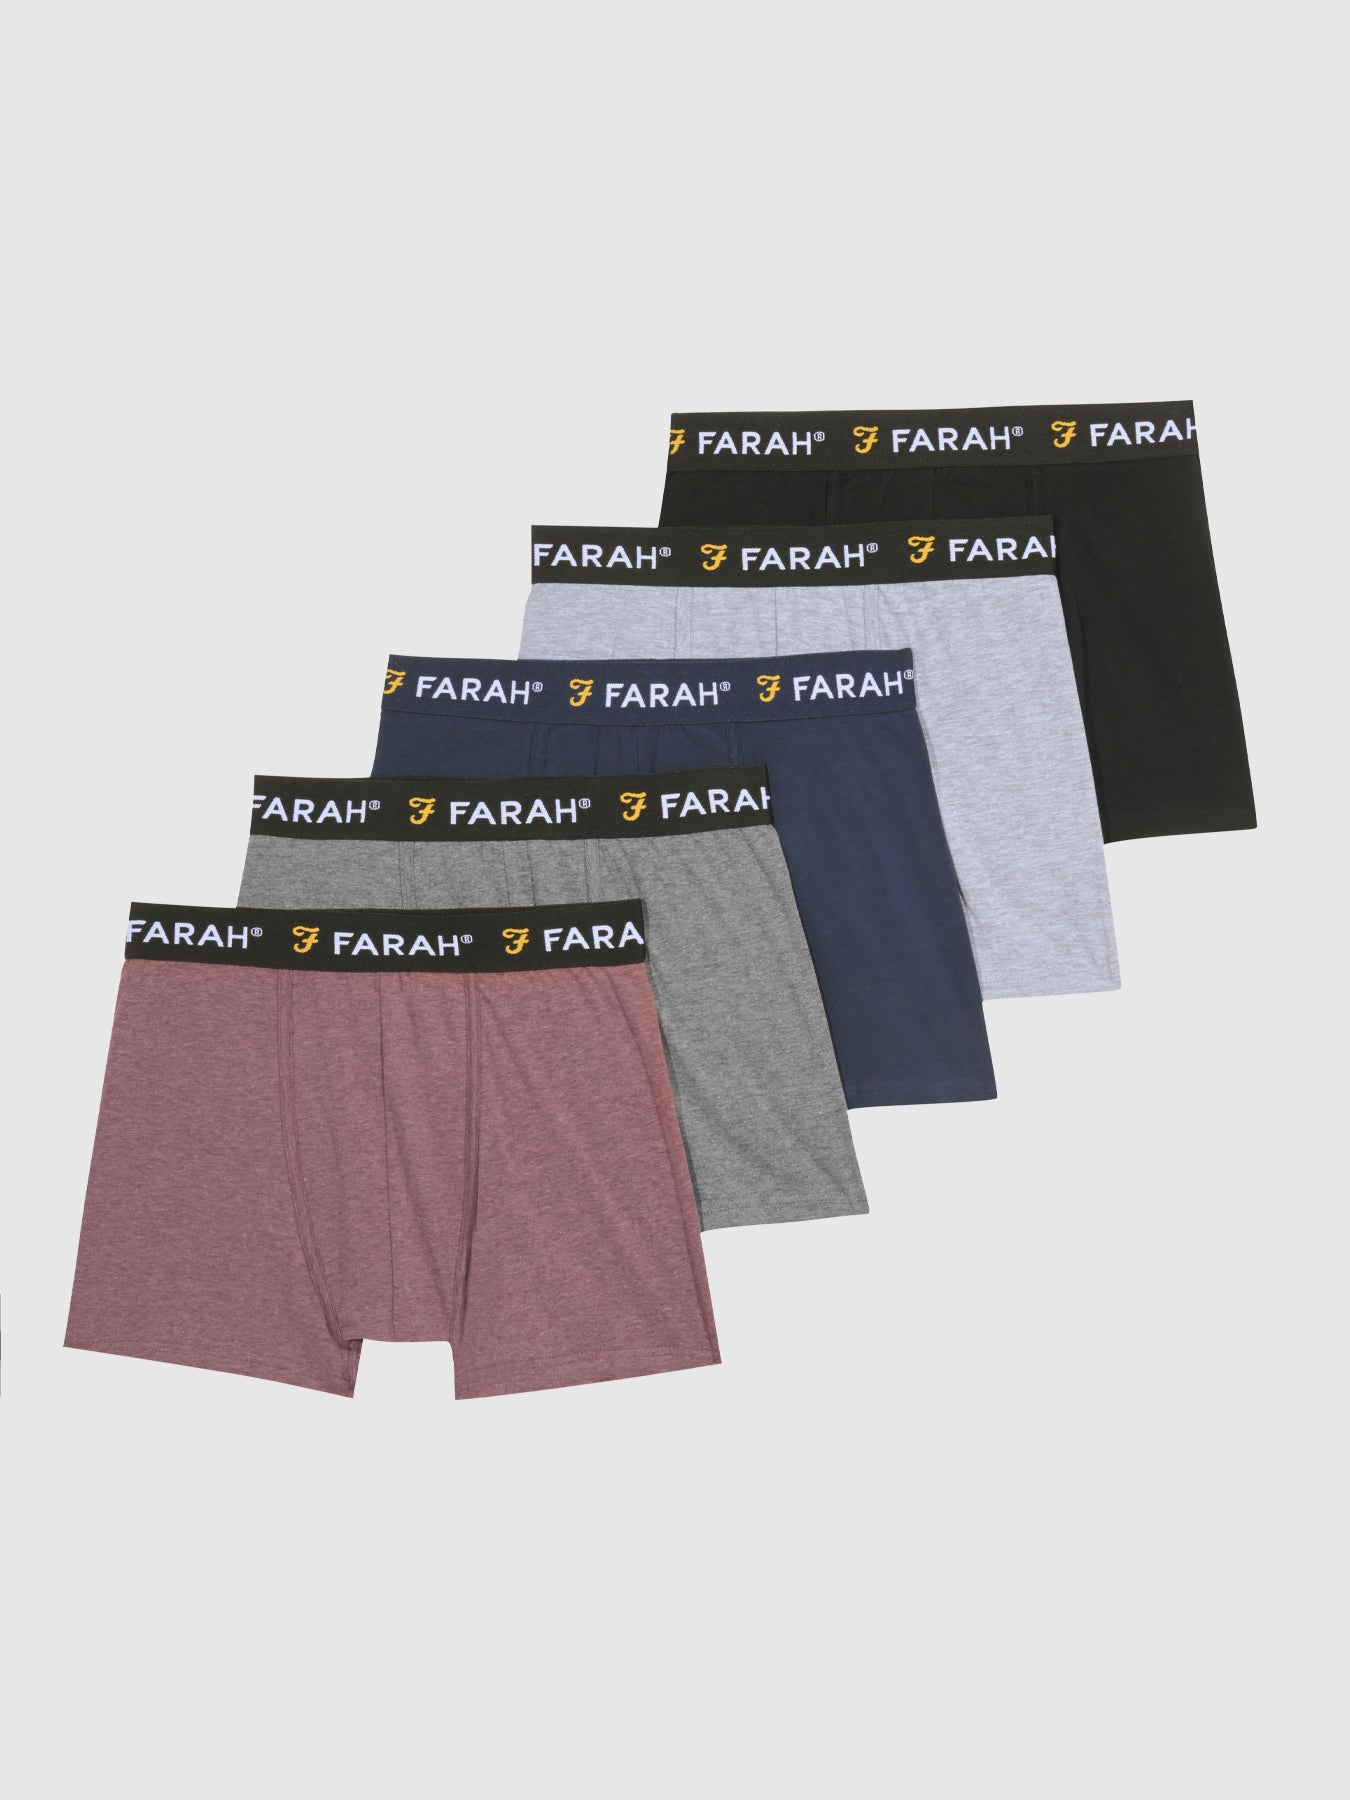 View Glenco Boxers In Assorted Colours information